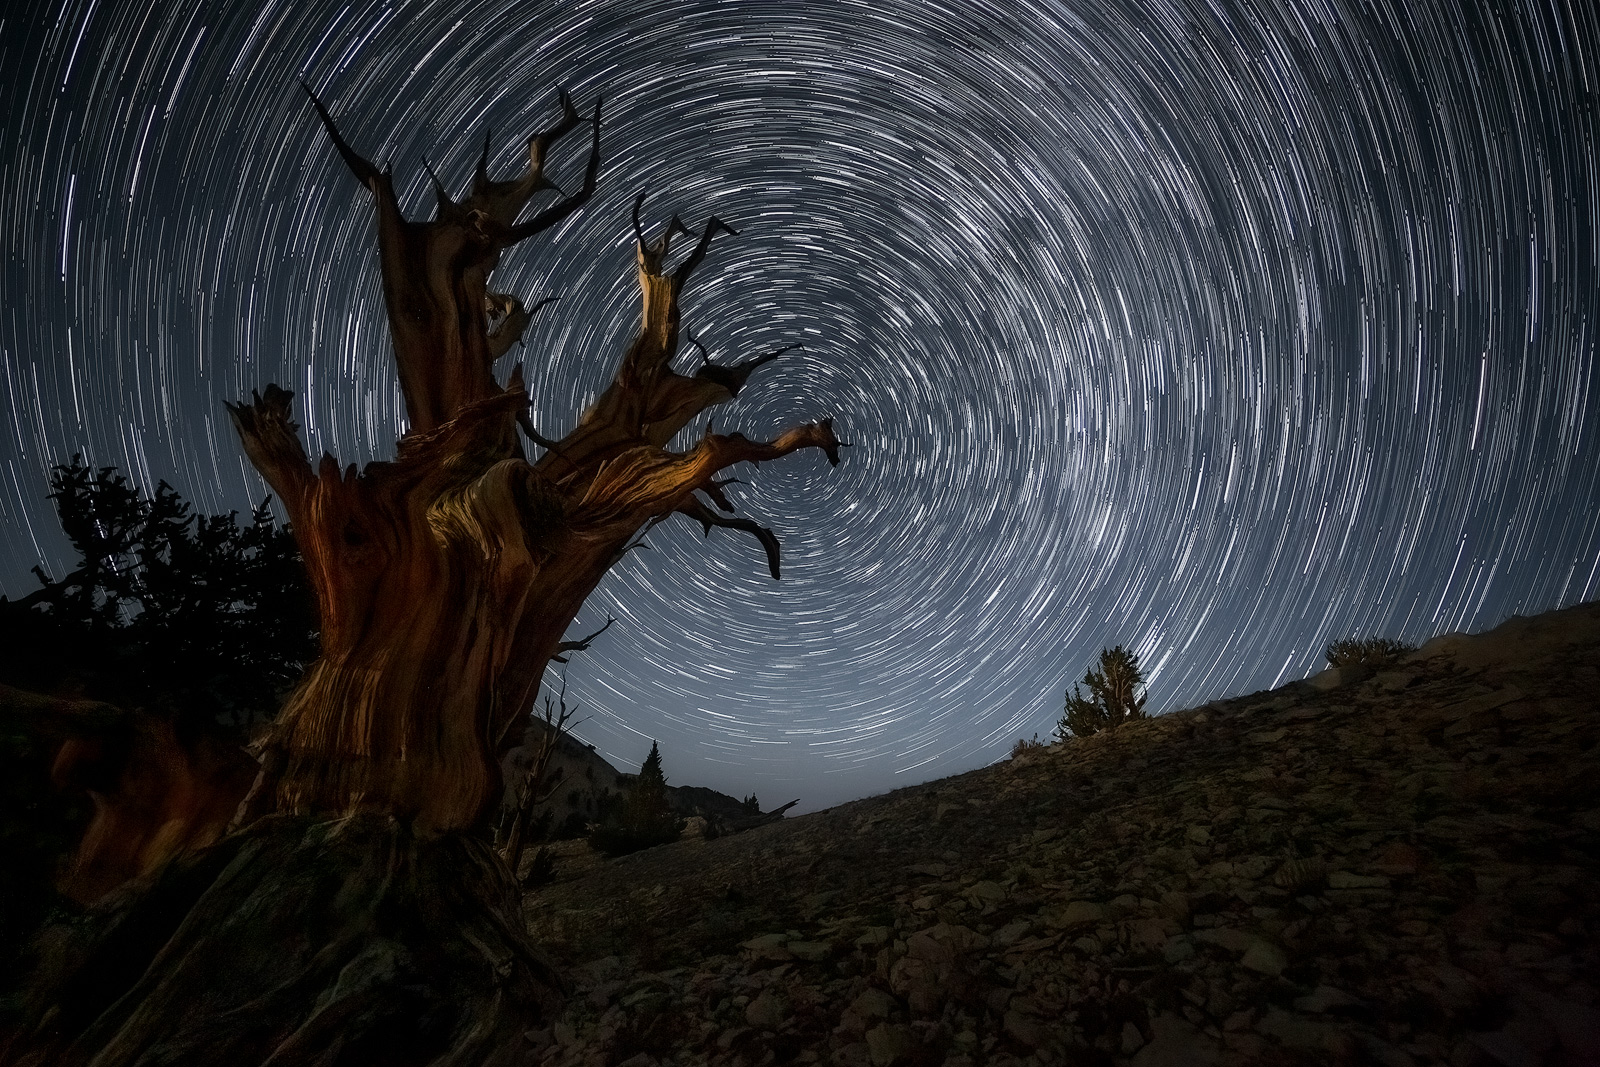 A star trail image in a dark ancient tree forest.